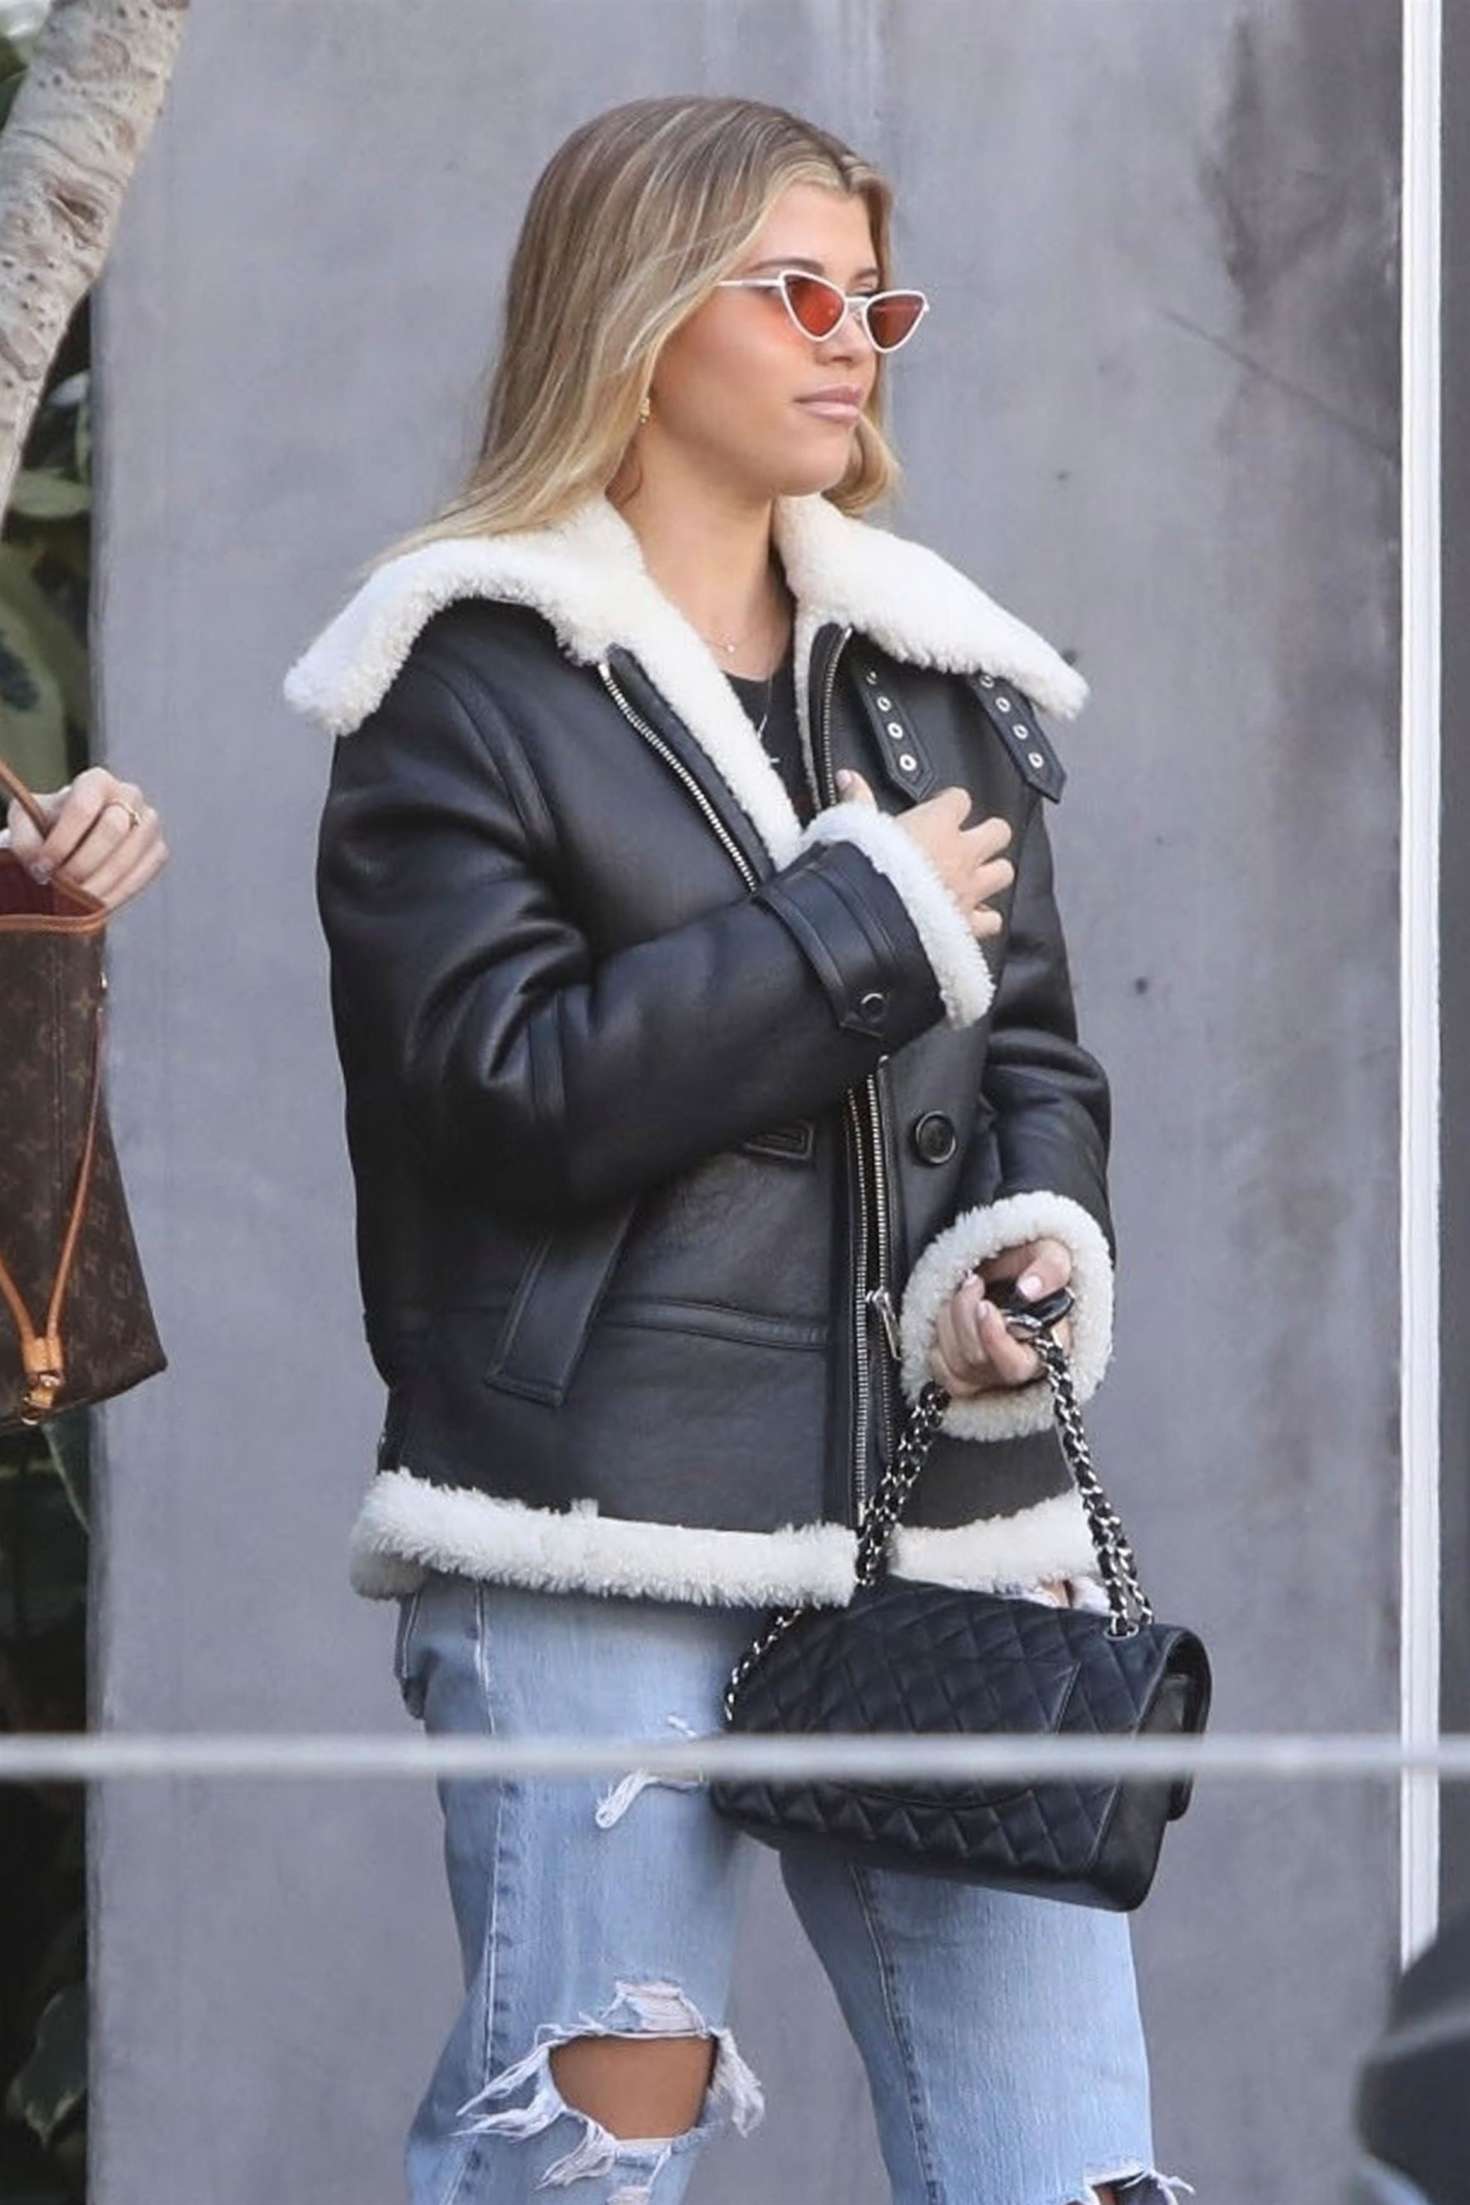 Sofia Richie 2019 : Sofia Richie: Out for lunch at Cafe Habana -07